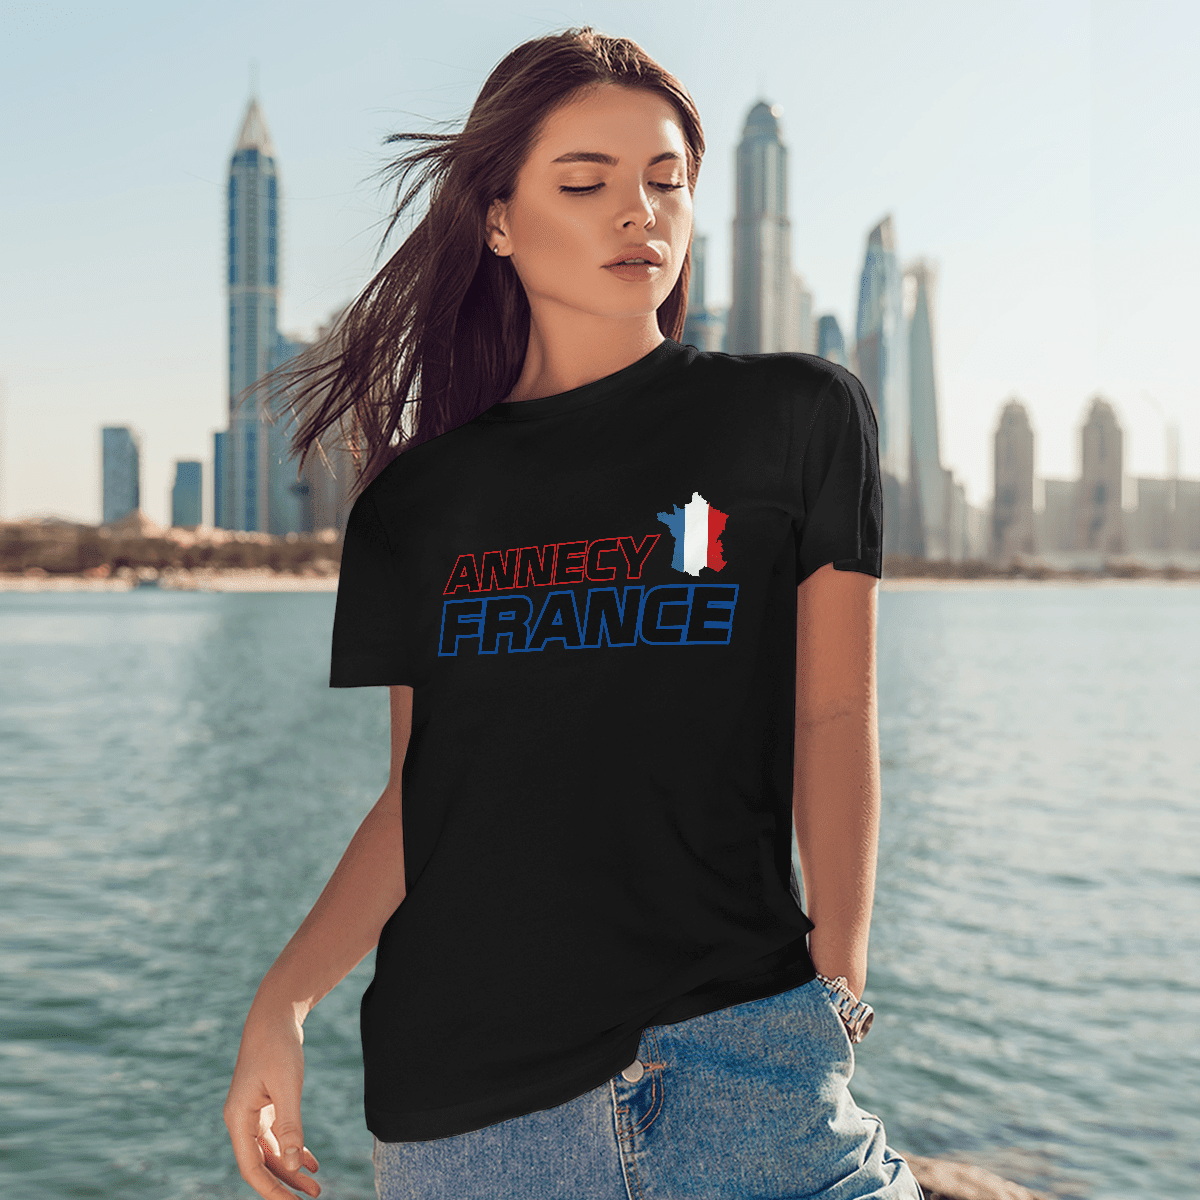 Annecy France Shirt